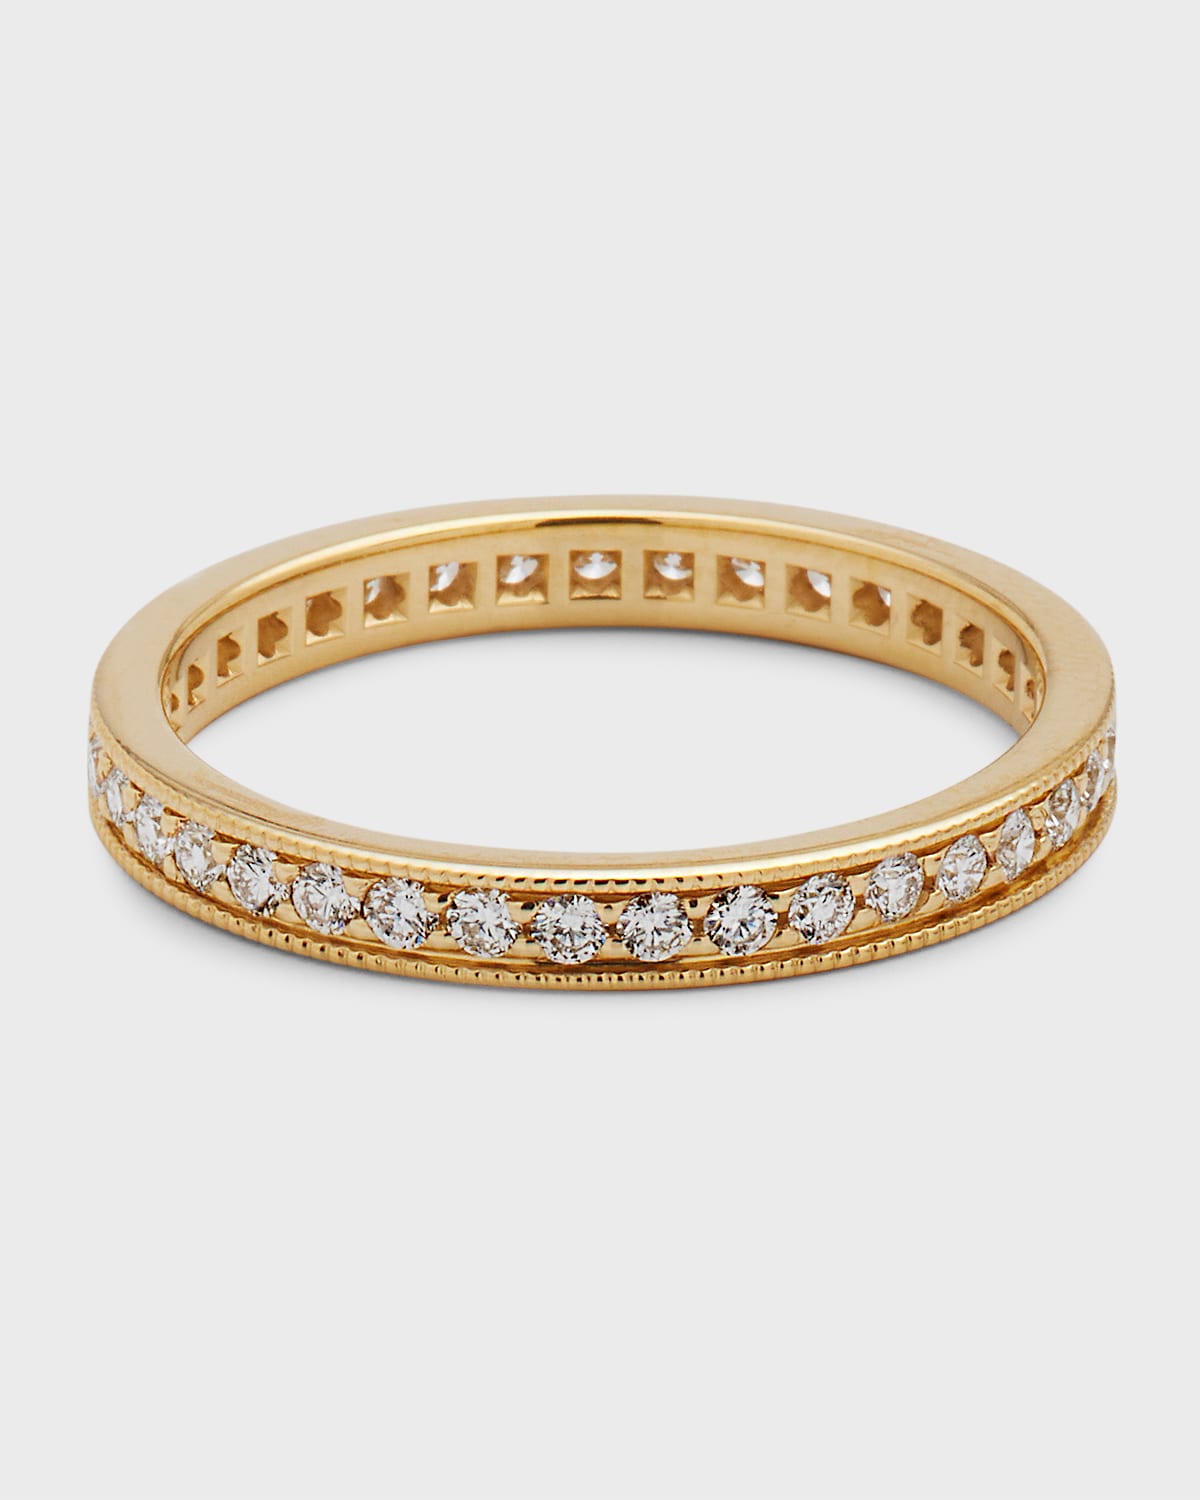 NM Diamond Collection Channel-Set Diamond Eternity Band Ring in 18K Yellow Gold, Size 7